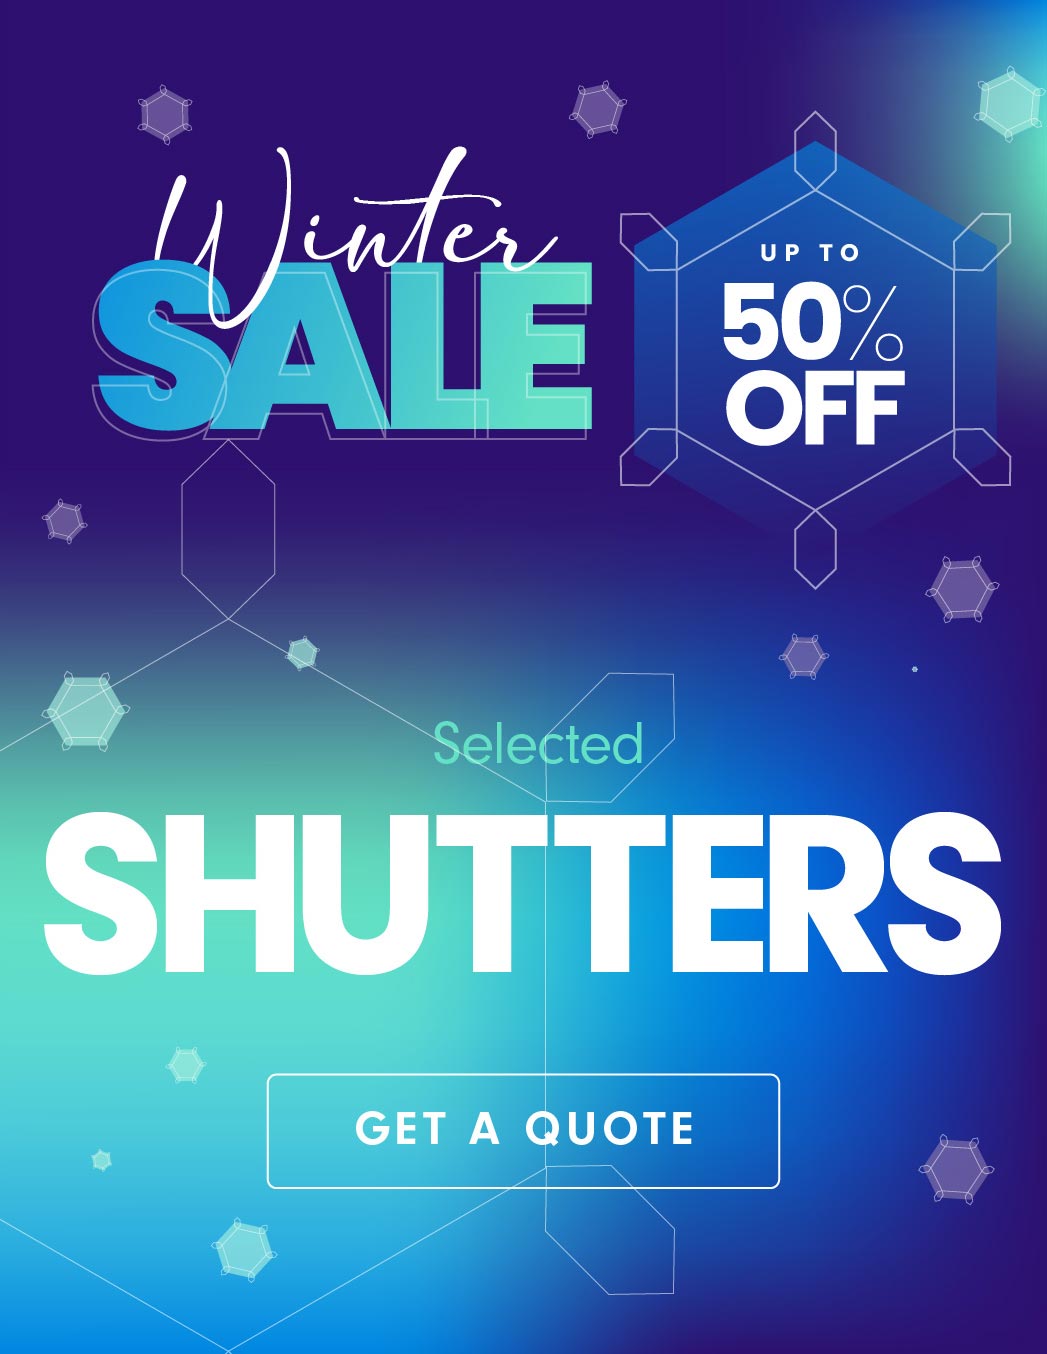 Up to 50% Off On Shutters